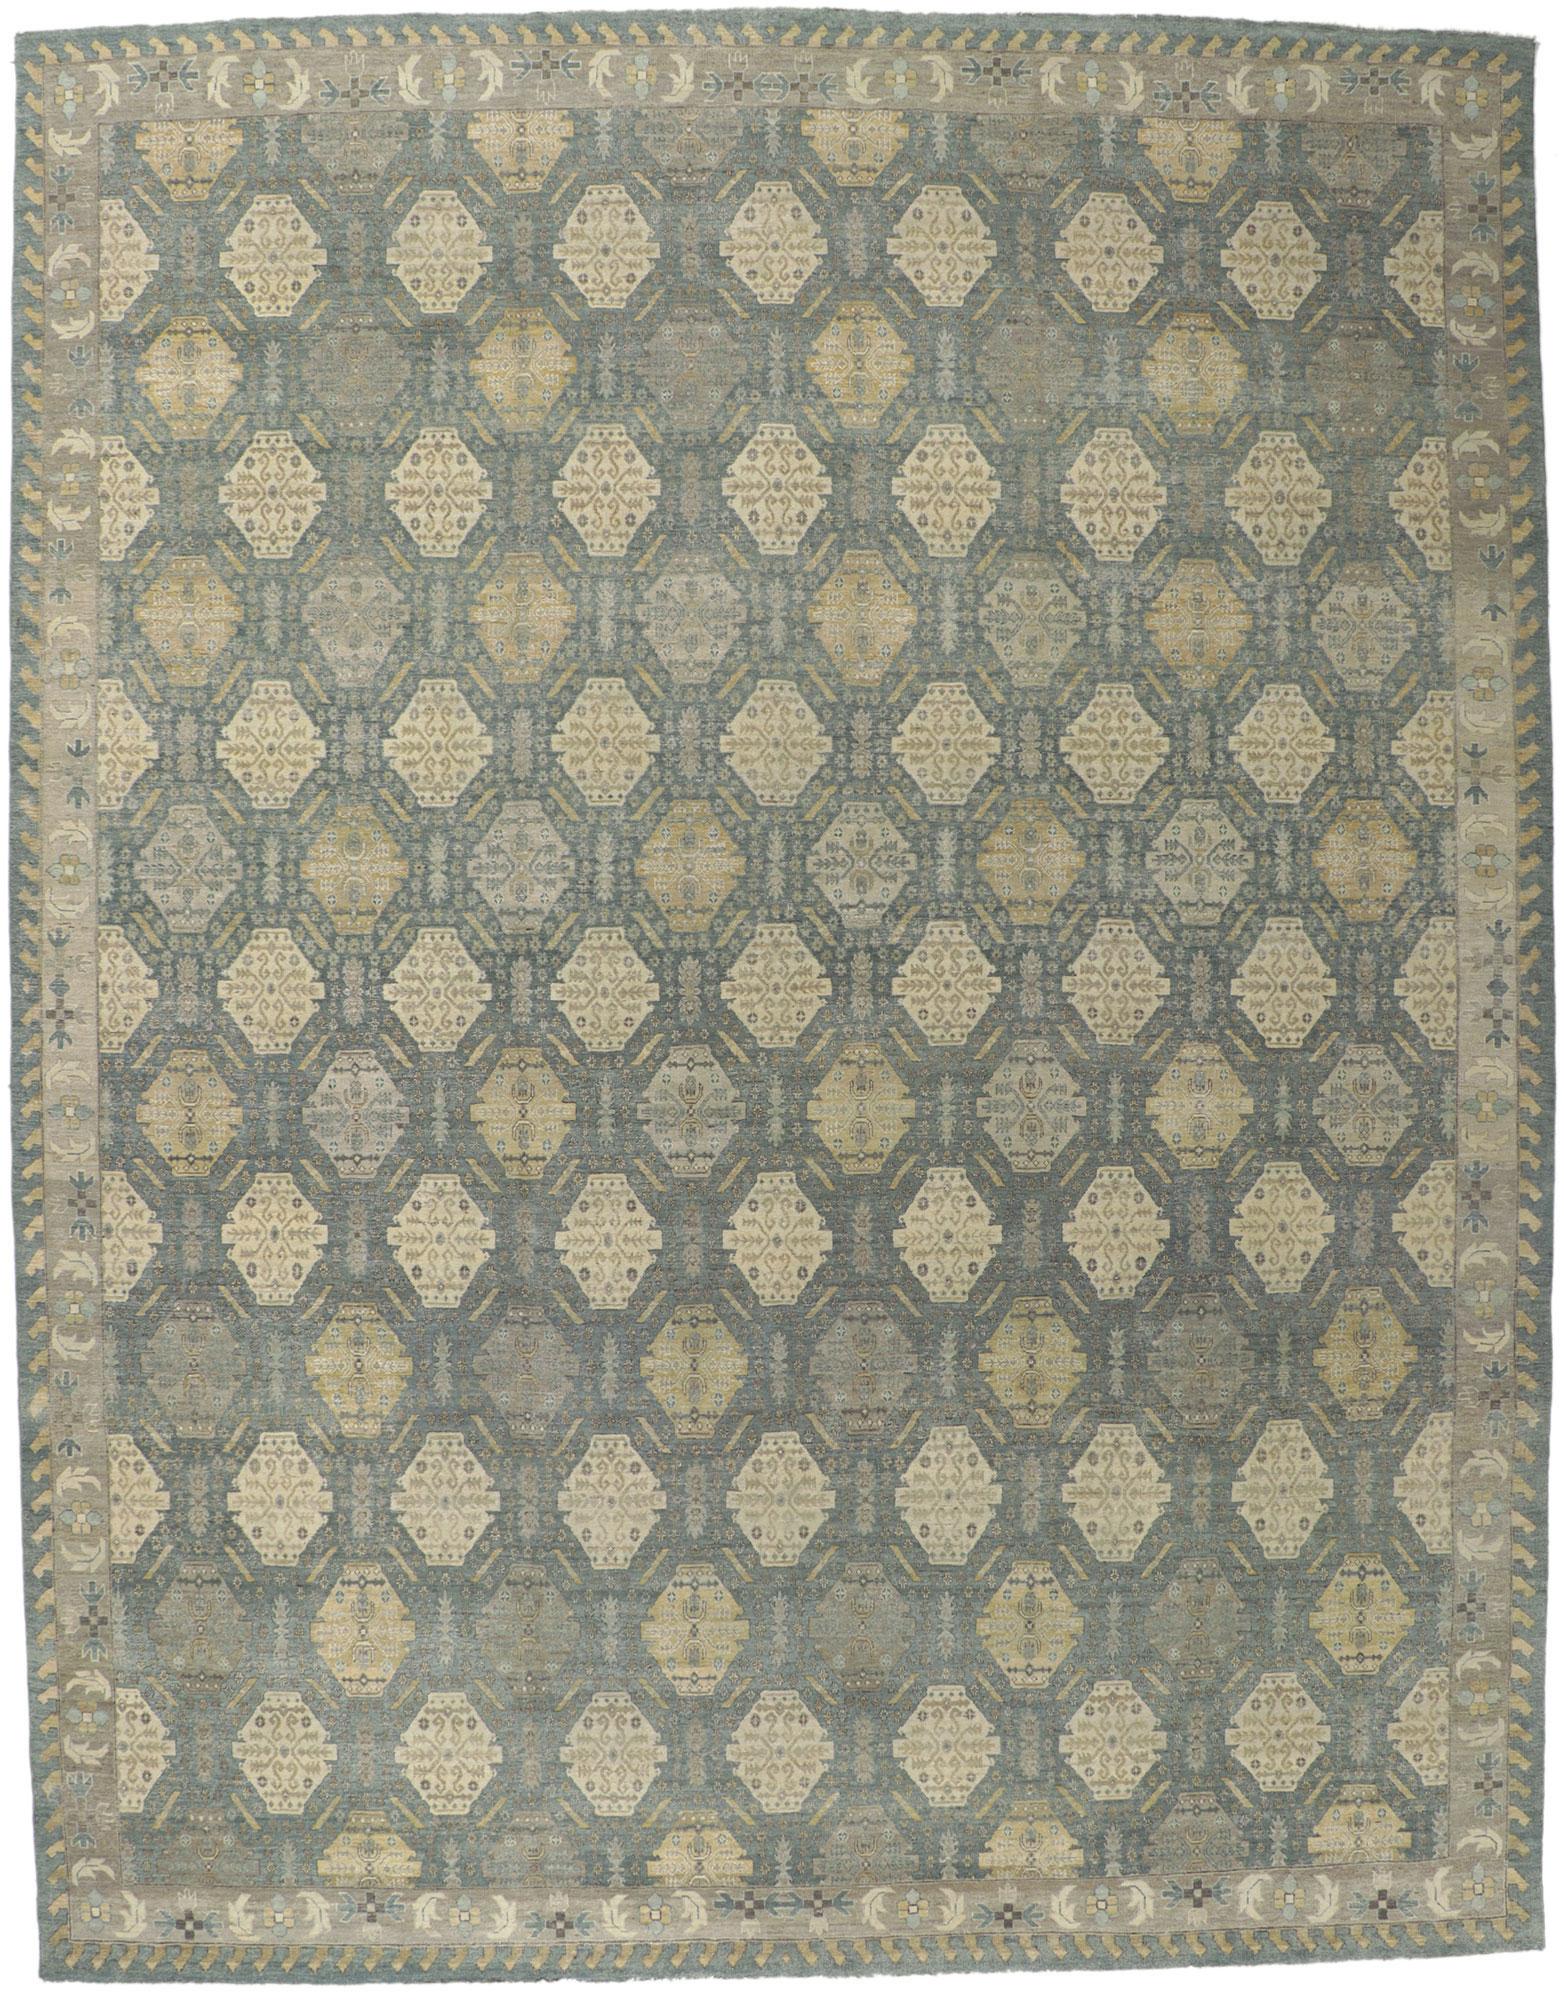 Vintage-Inspired Muted Oushak Rug, Modern Style Meets Rustic Sensibility For Sale 4